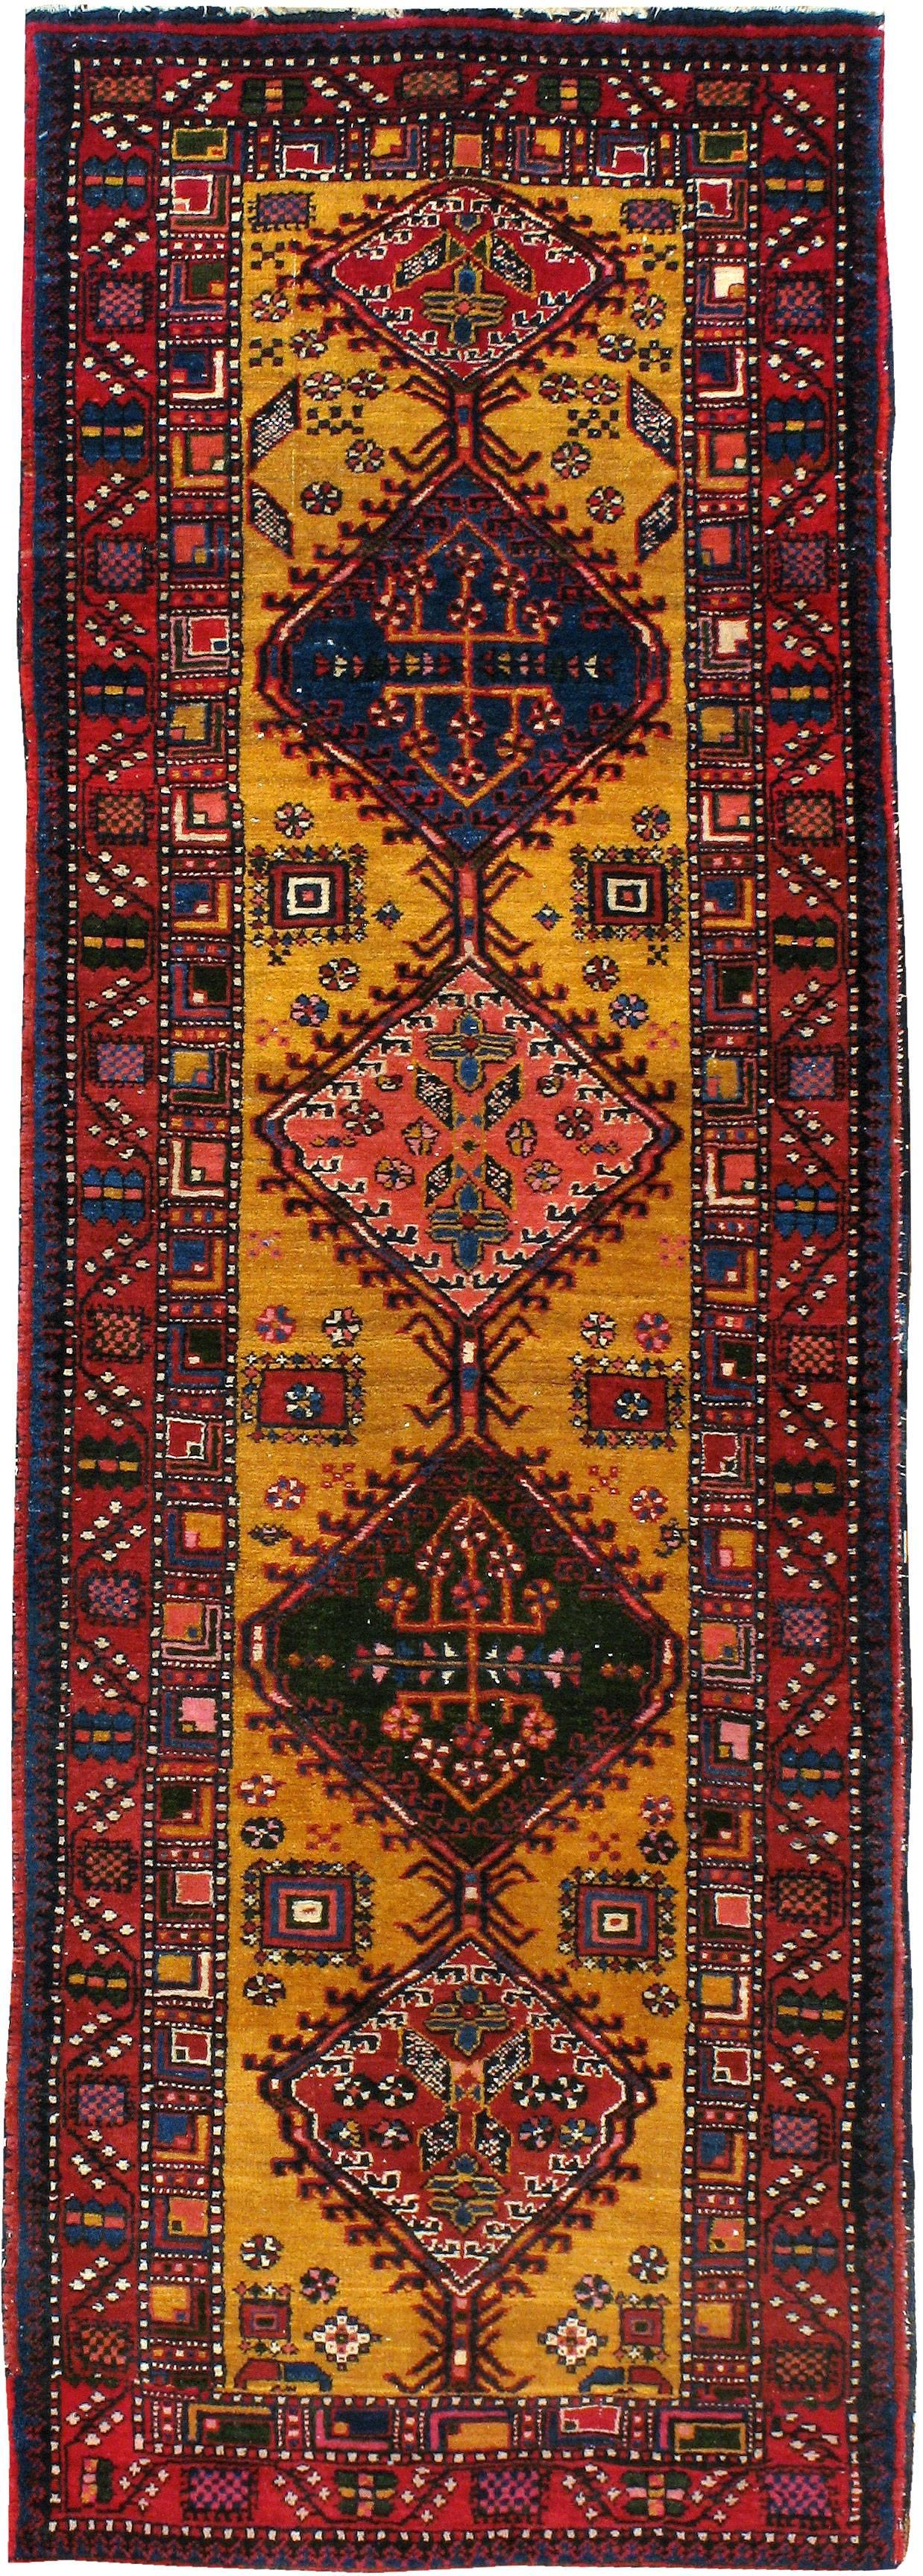 An antique Persian Serab Runner from the second quarter of the 20th century.